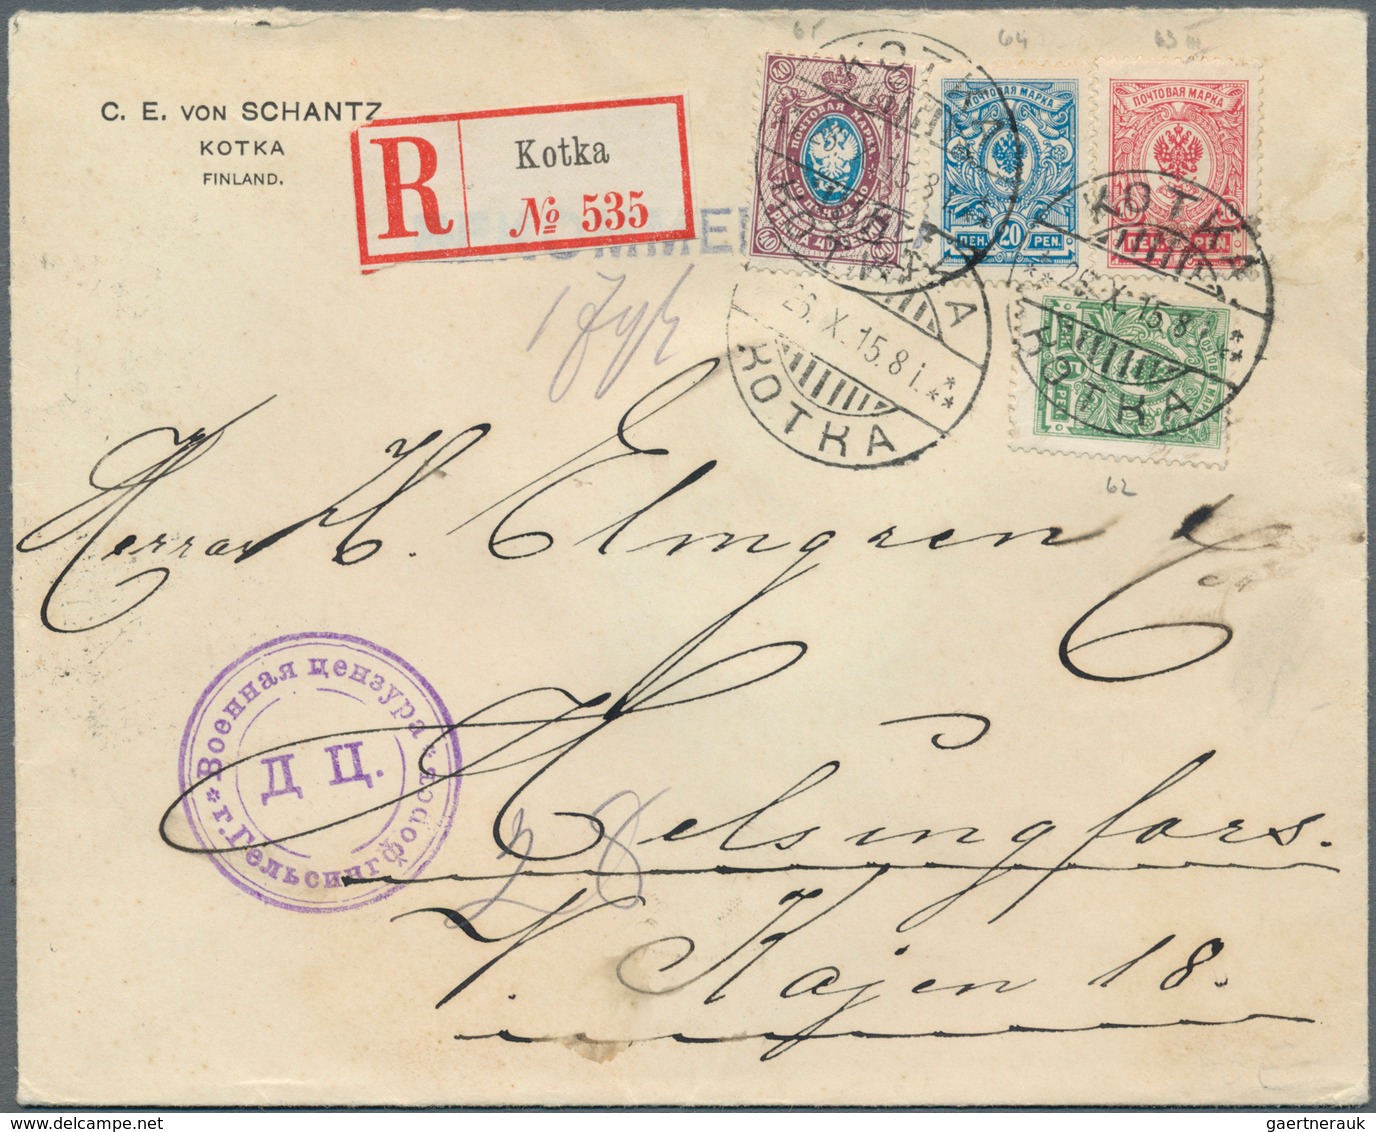 26308 Finnland: 1856/1963, interesting lot of ca. 60 franked covers/postcards and postal stationery (unuse